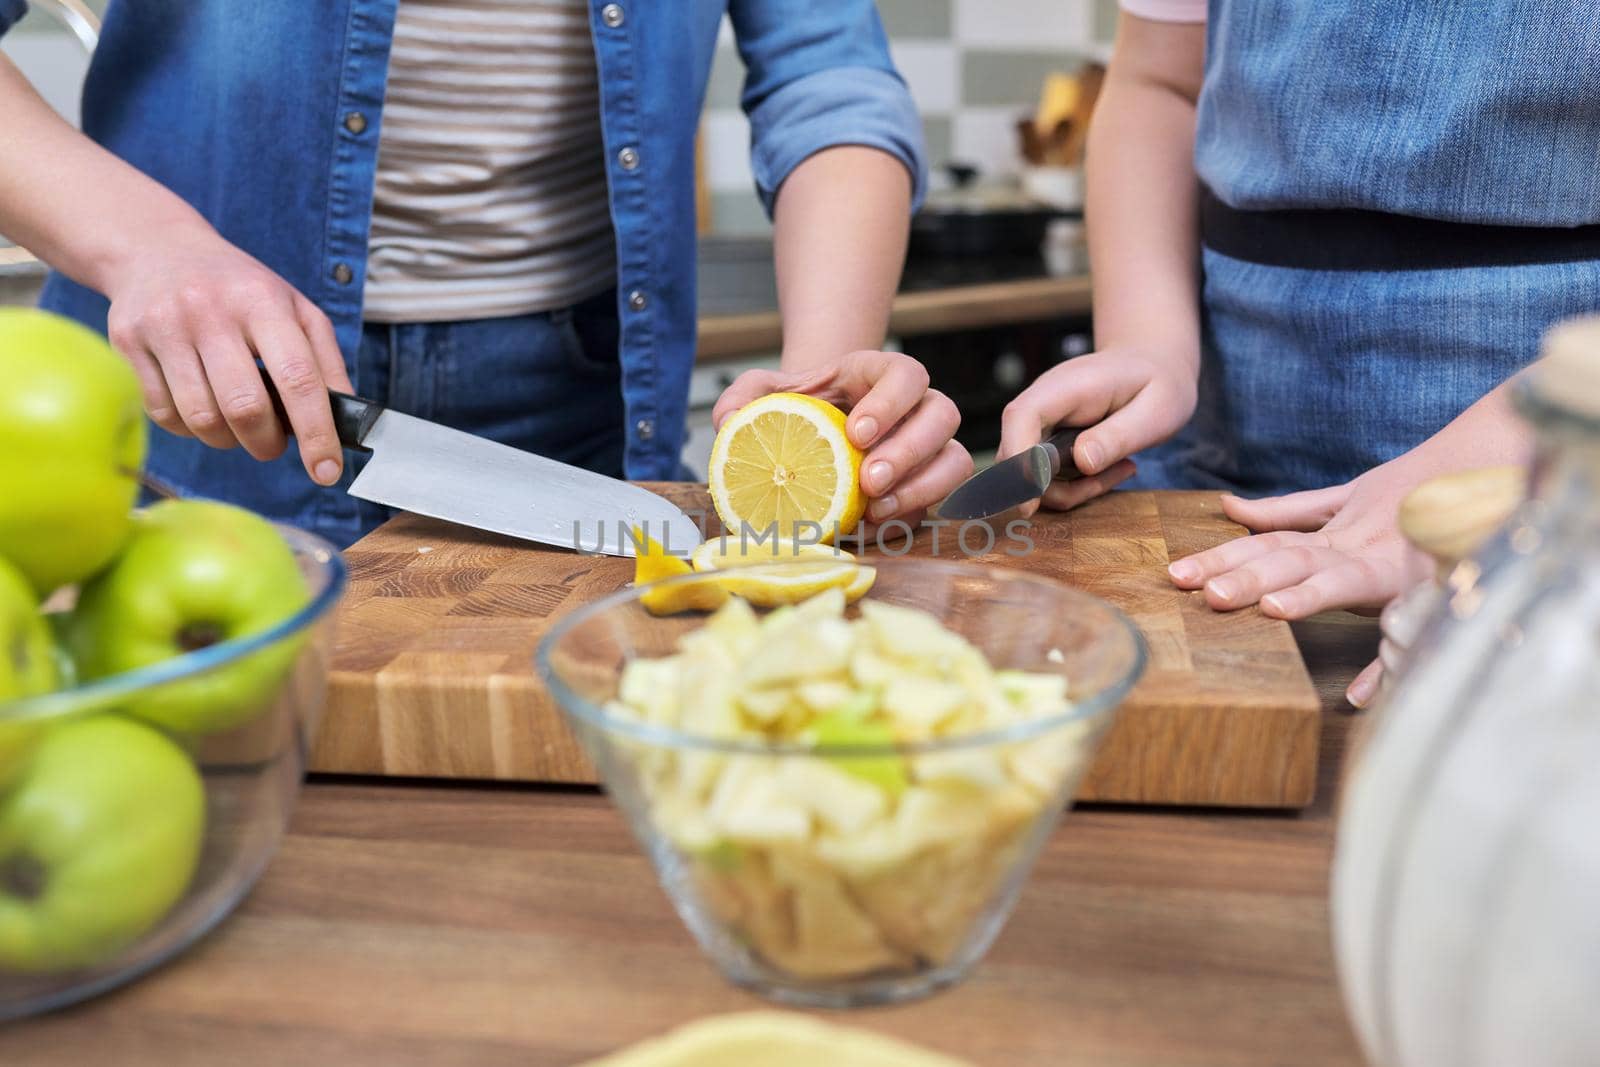 Mom and teenage daughter preparing apple pie together, at home in the kitchen. Close up of hands cutting lemon